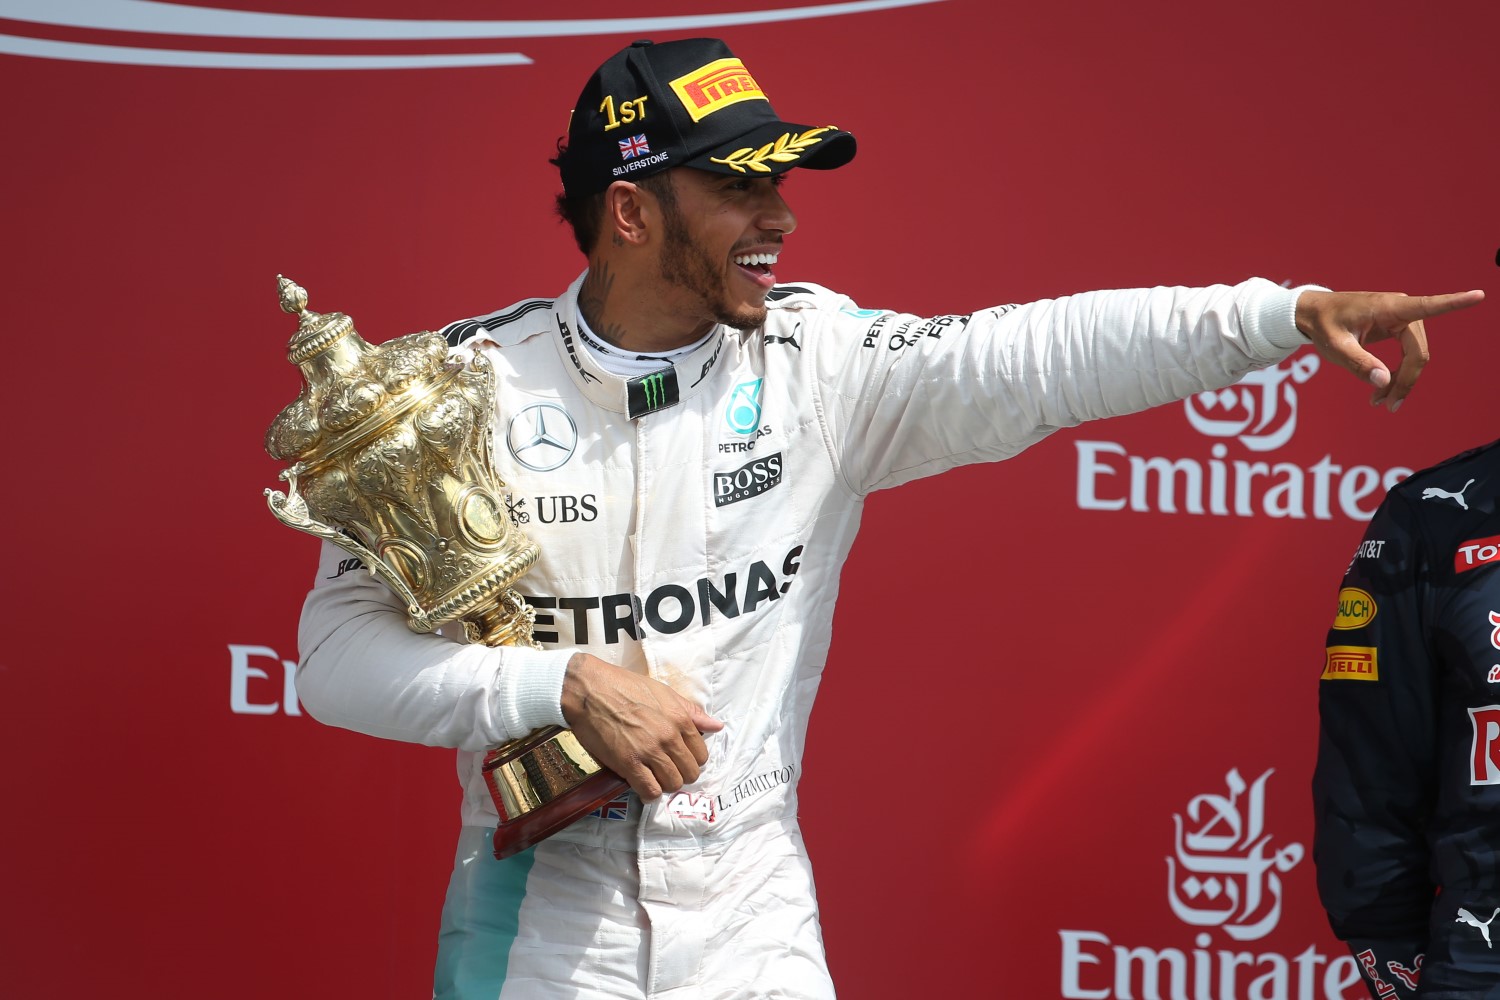 Hamilton expects to win at home